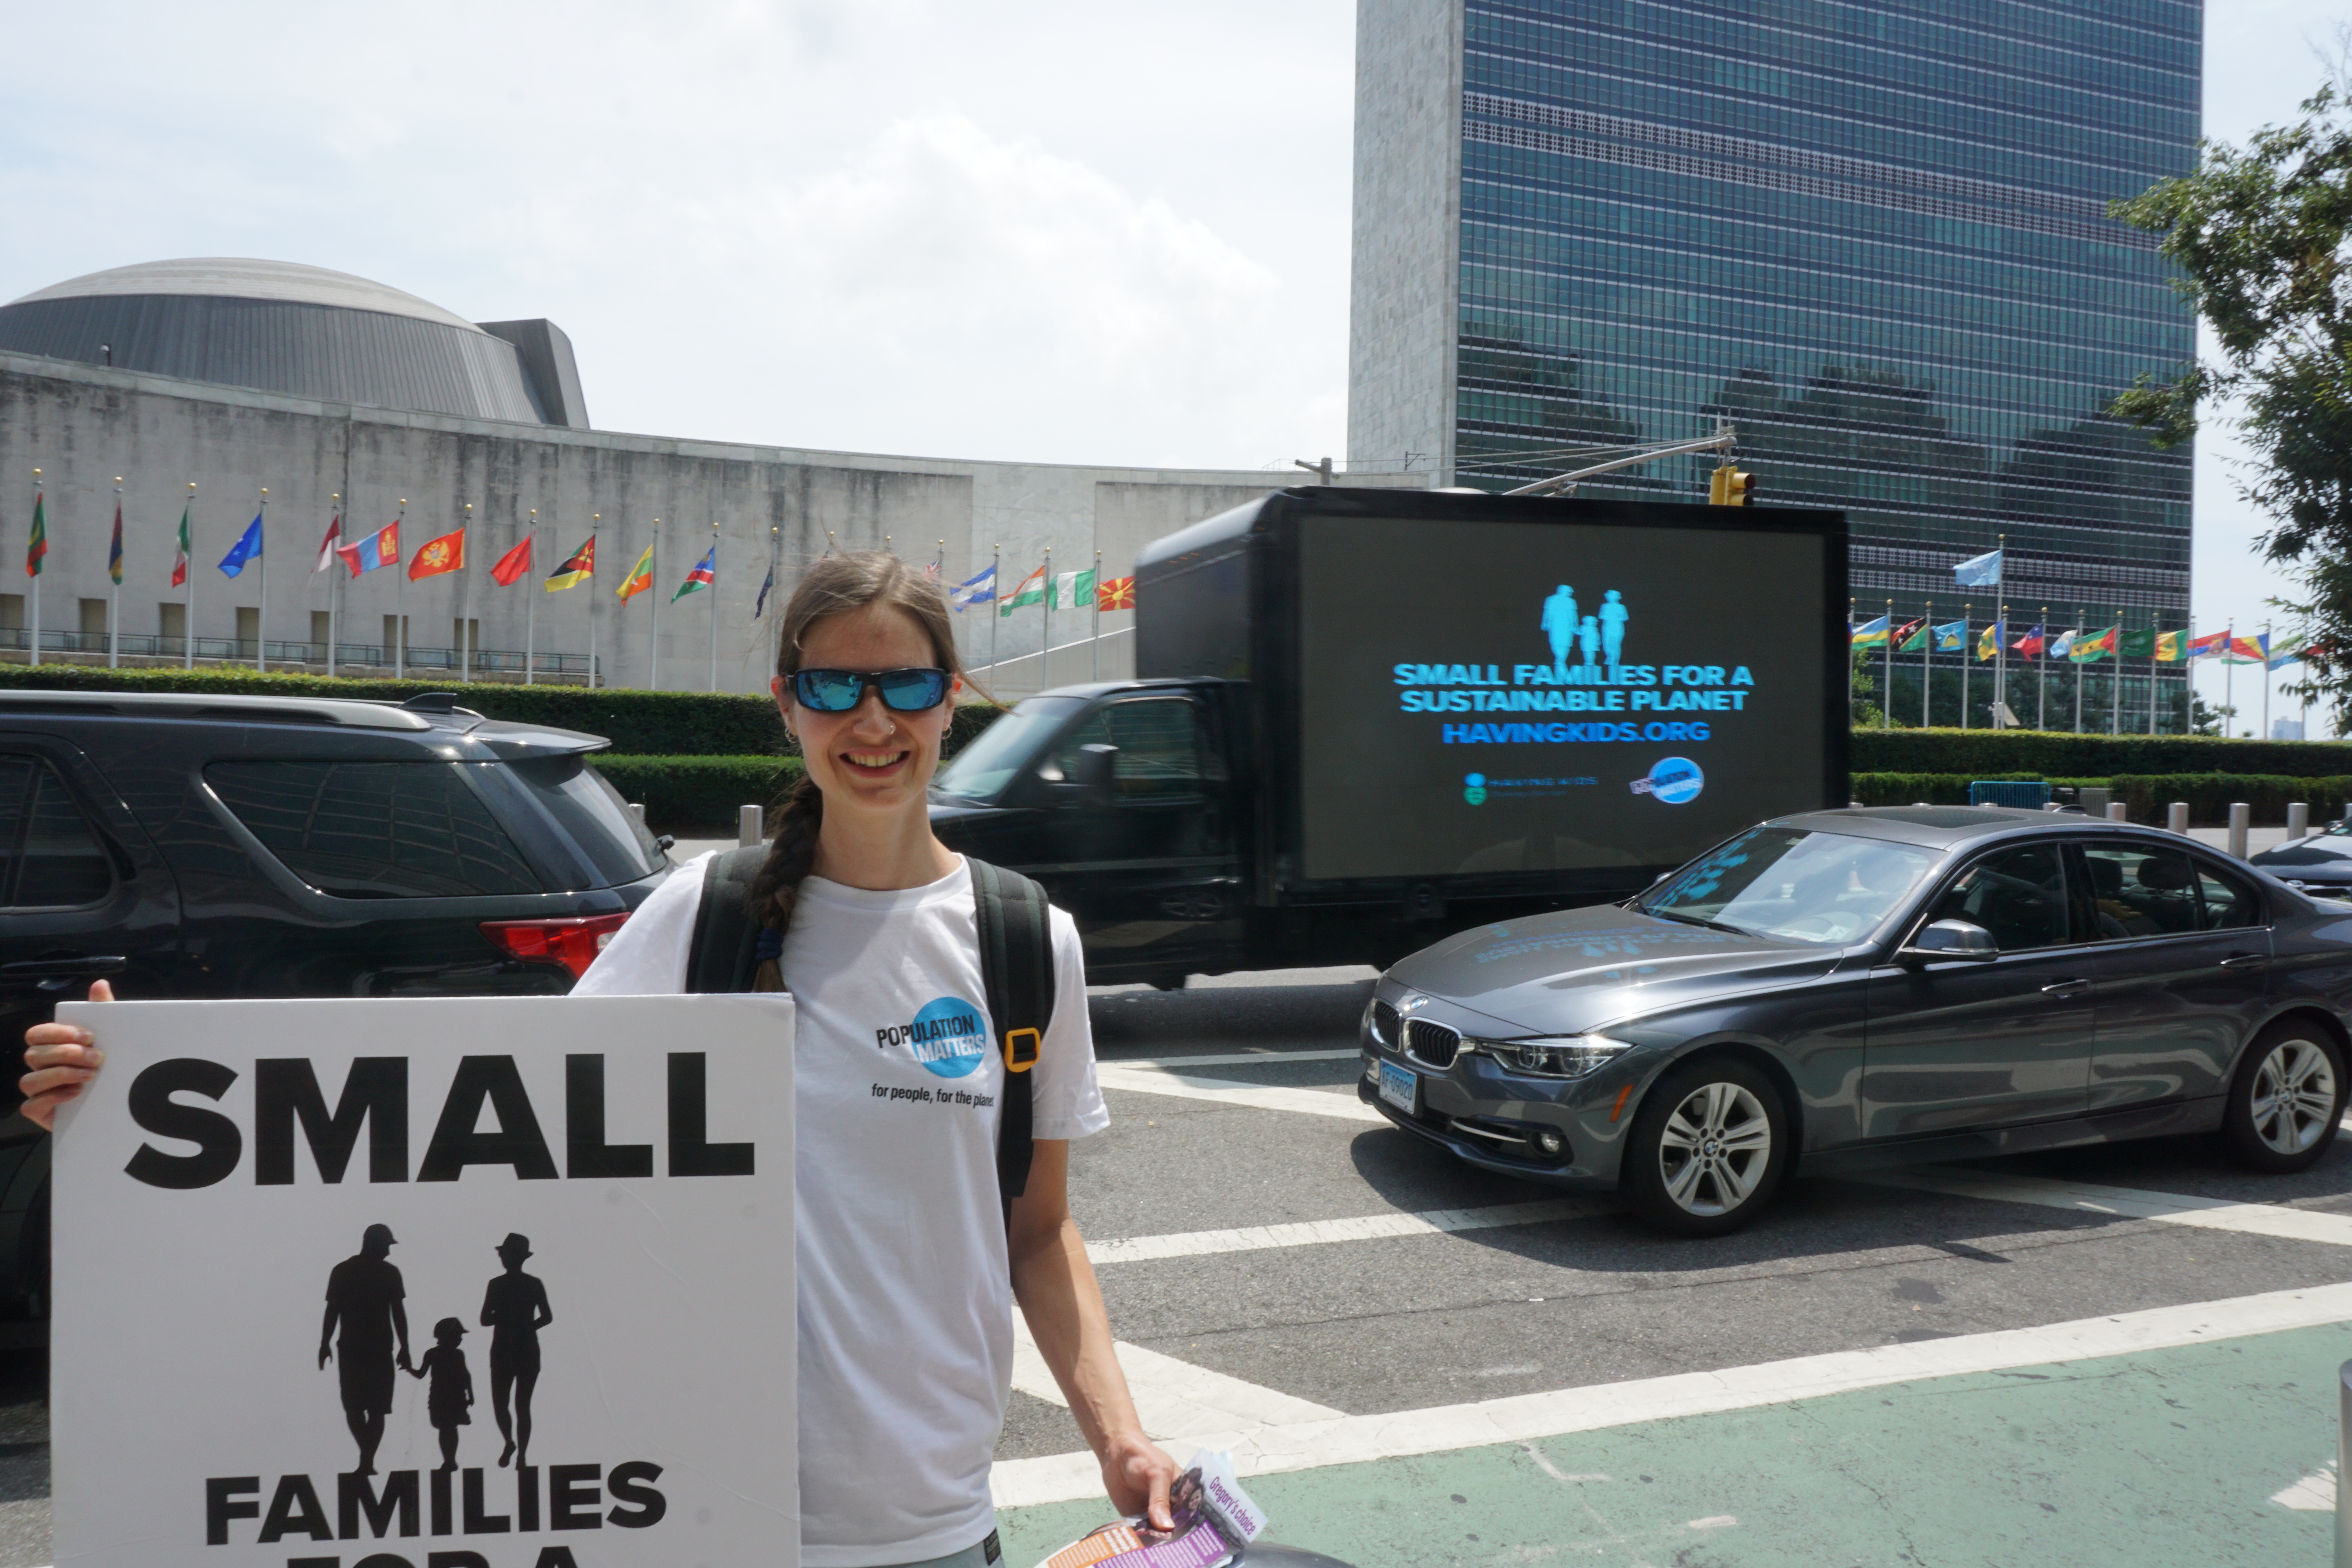 Population Matters' Olivia at UN HQ on World Population Day 2019